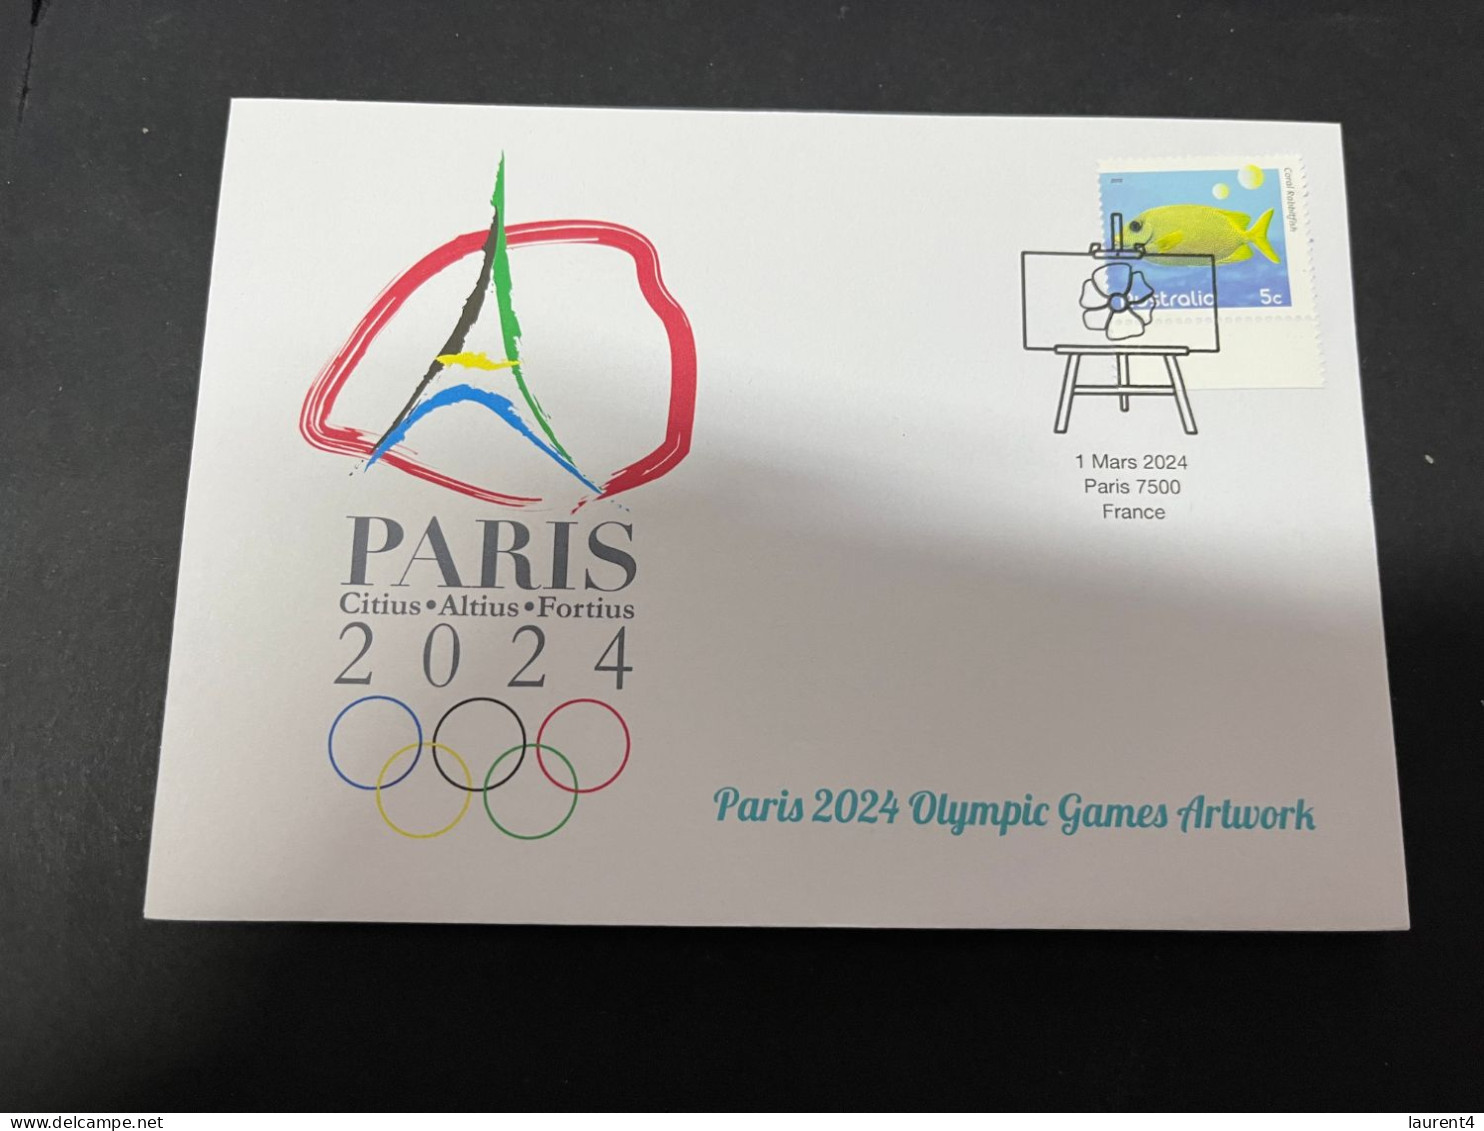 8-3-2024 (2 Y 30) Paris Olympic Games 2024 - 2 (of 12 Covers Series) For The Paris 2024 Olympic Games Artwork - Summer 2024: Paris